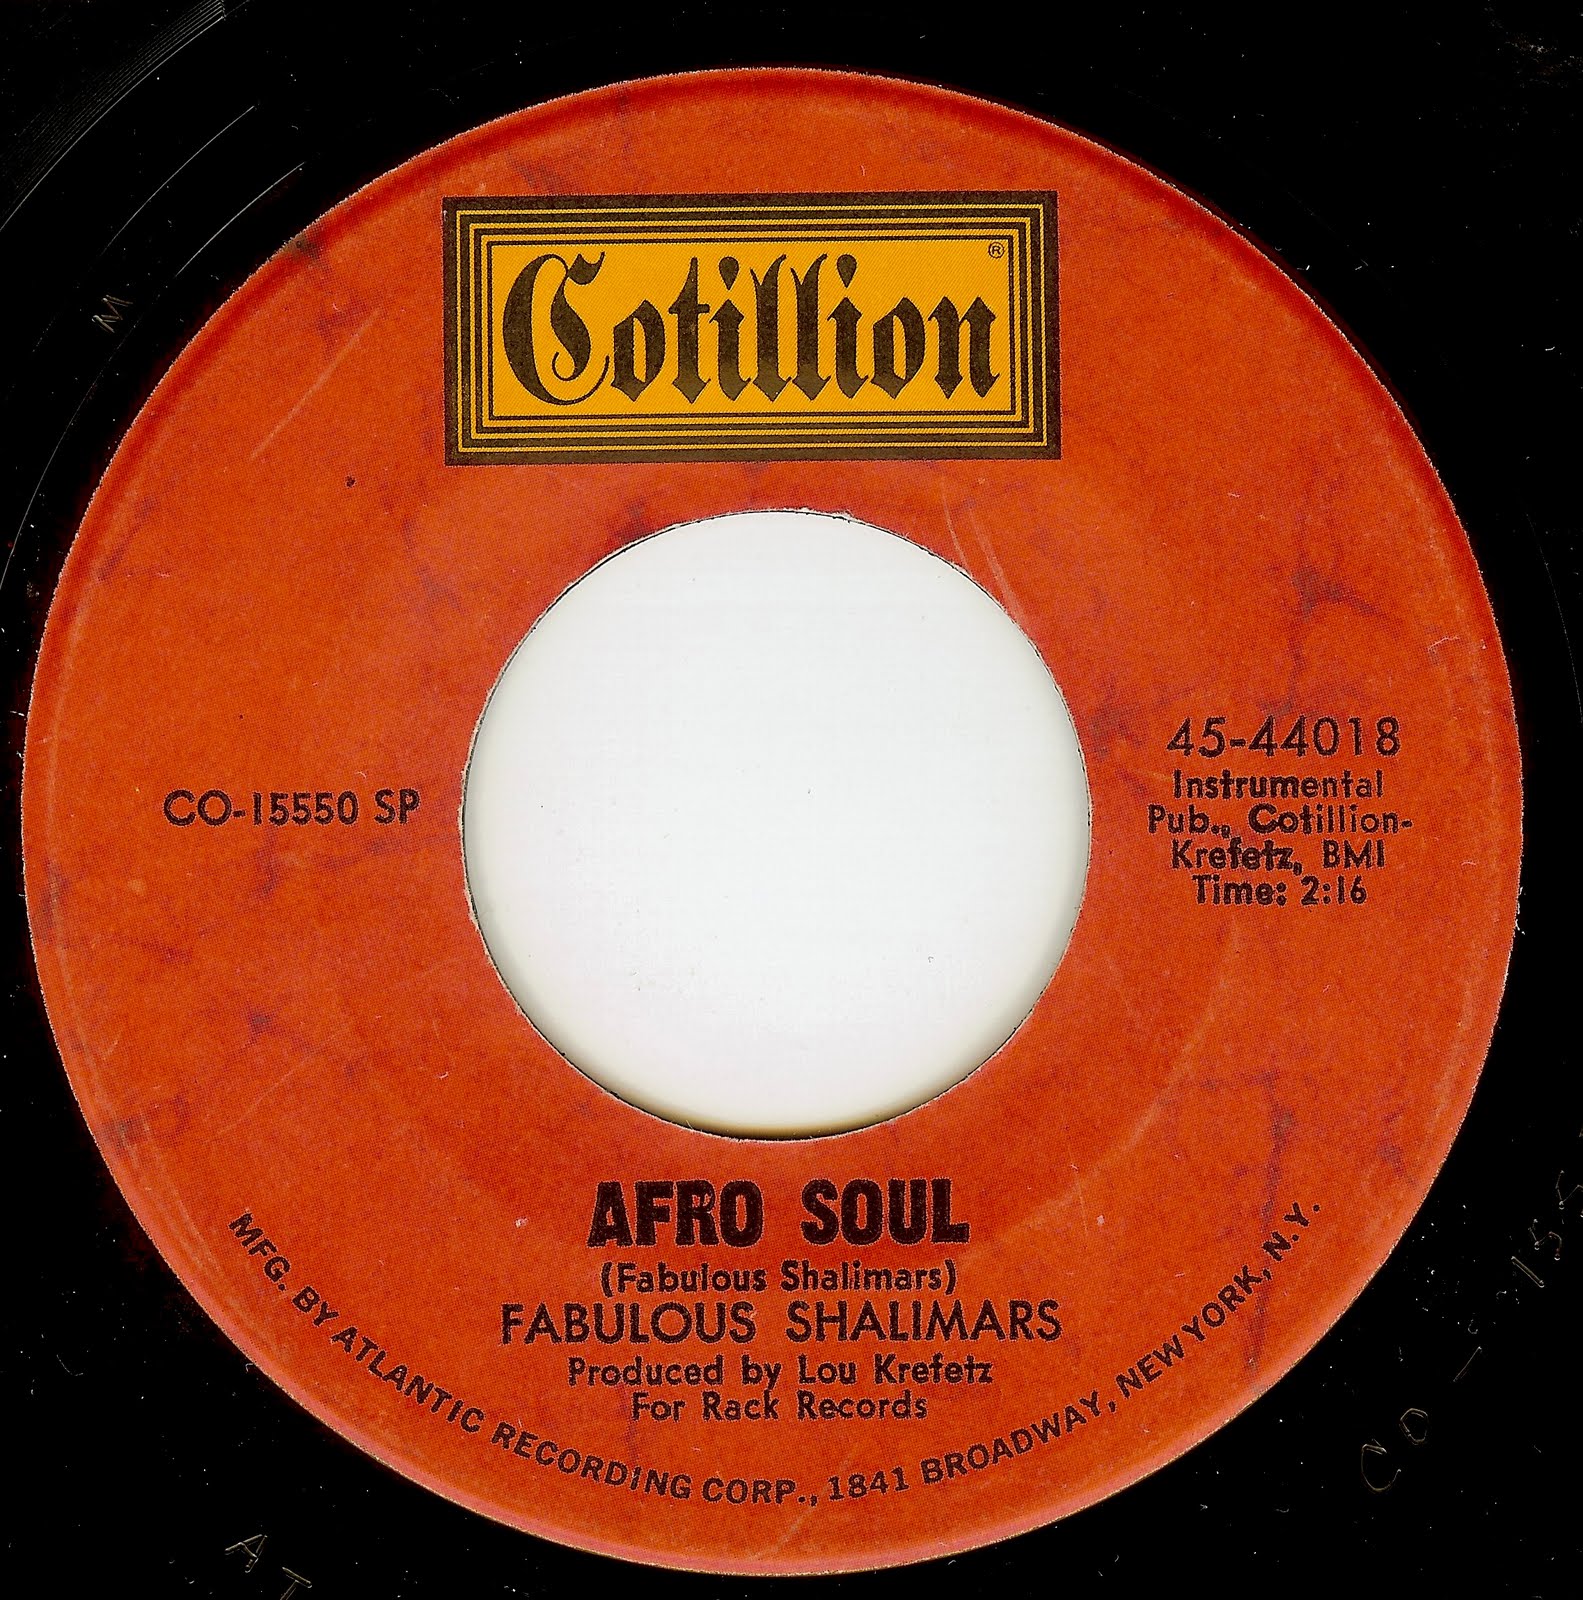 ... Daily 45: FABULOUS SHALIMARS - AFRO SOUL b/w PLAYING A LOSING GAME